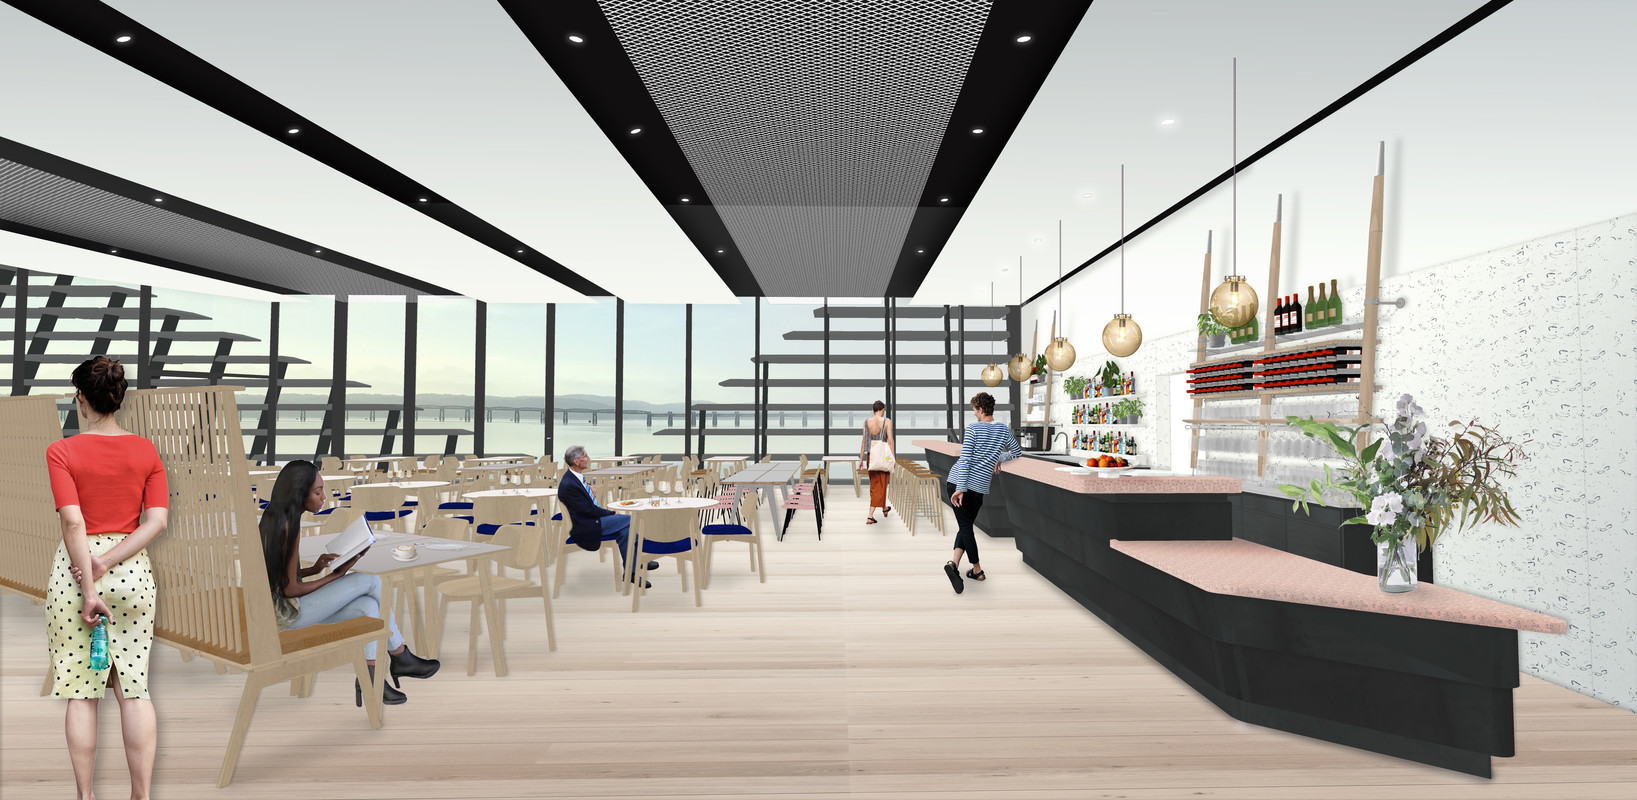 The second floor restaurant will offer stunning views over the River Tay.